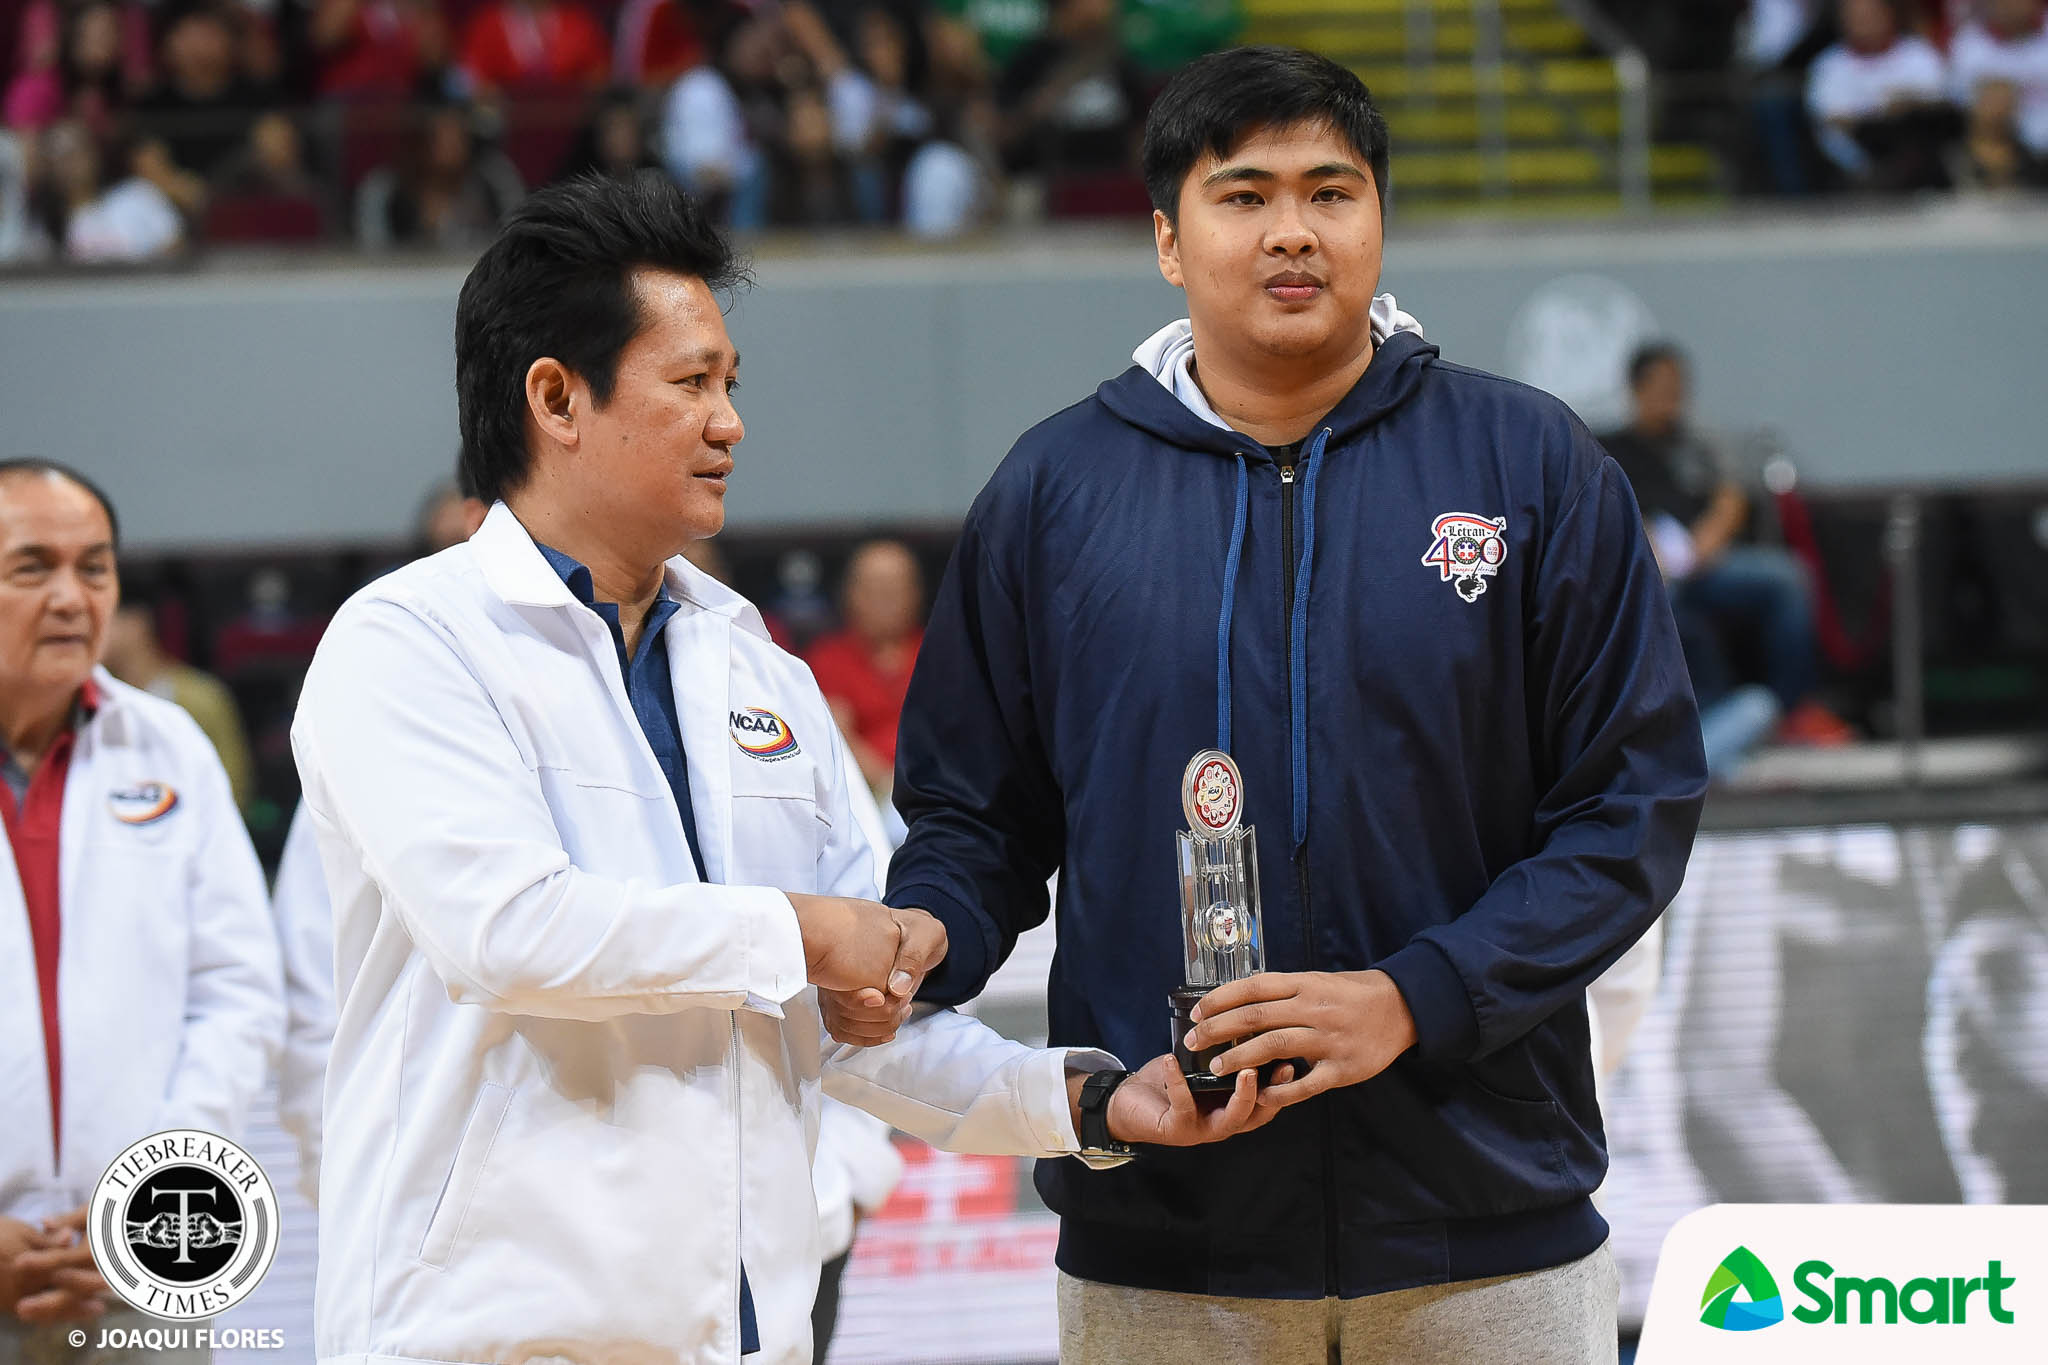 NCAA-94-Awarding-Muyang-8959 NCAA 99 to include third-place game, introduces separate awards for 'rookies', 'freshmen' Basketball CSB CSJL LPU MIT NCAA News  - philippine sports news